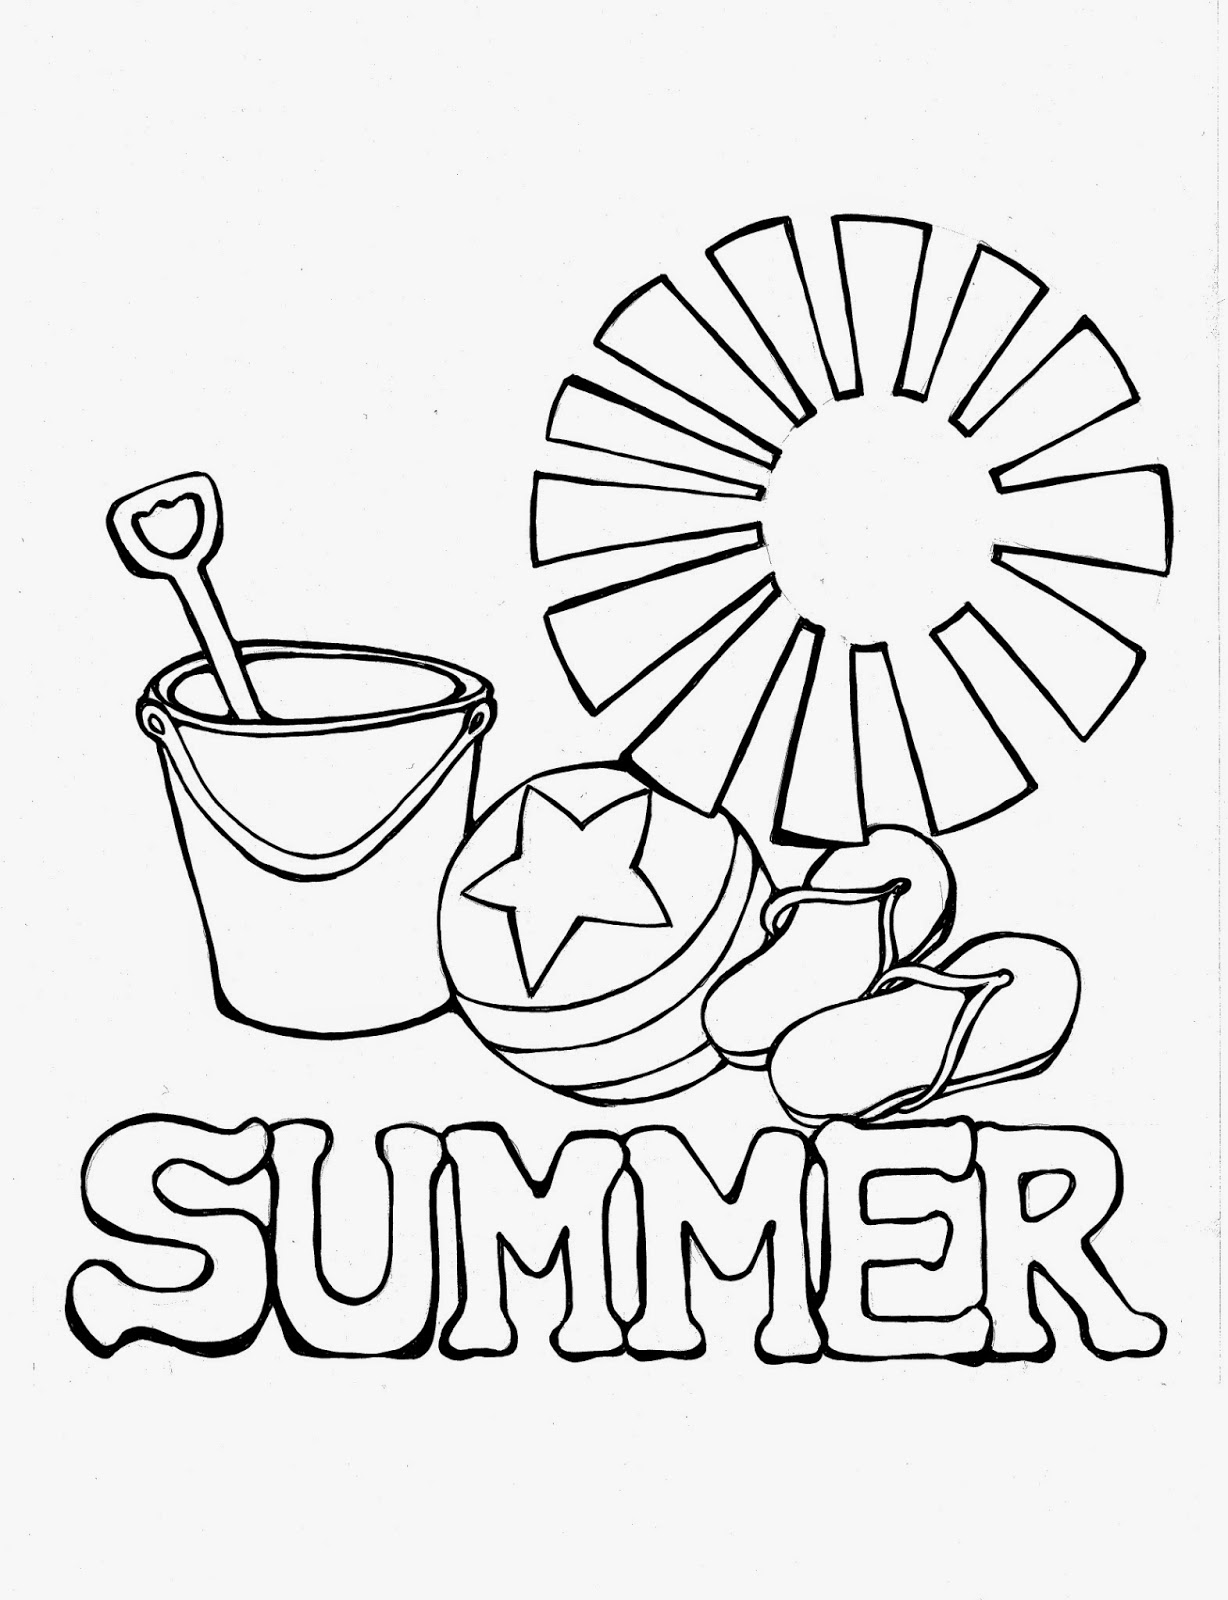 Summer Coloring Activity 1